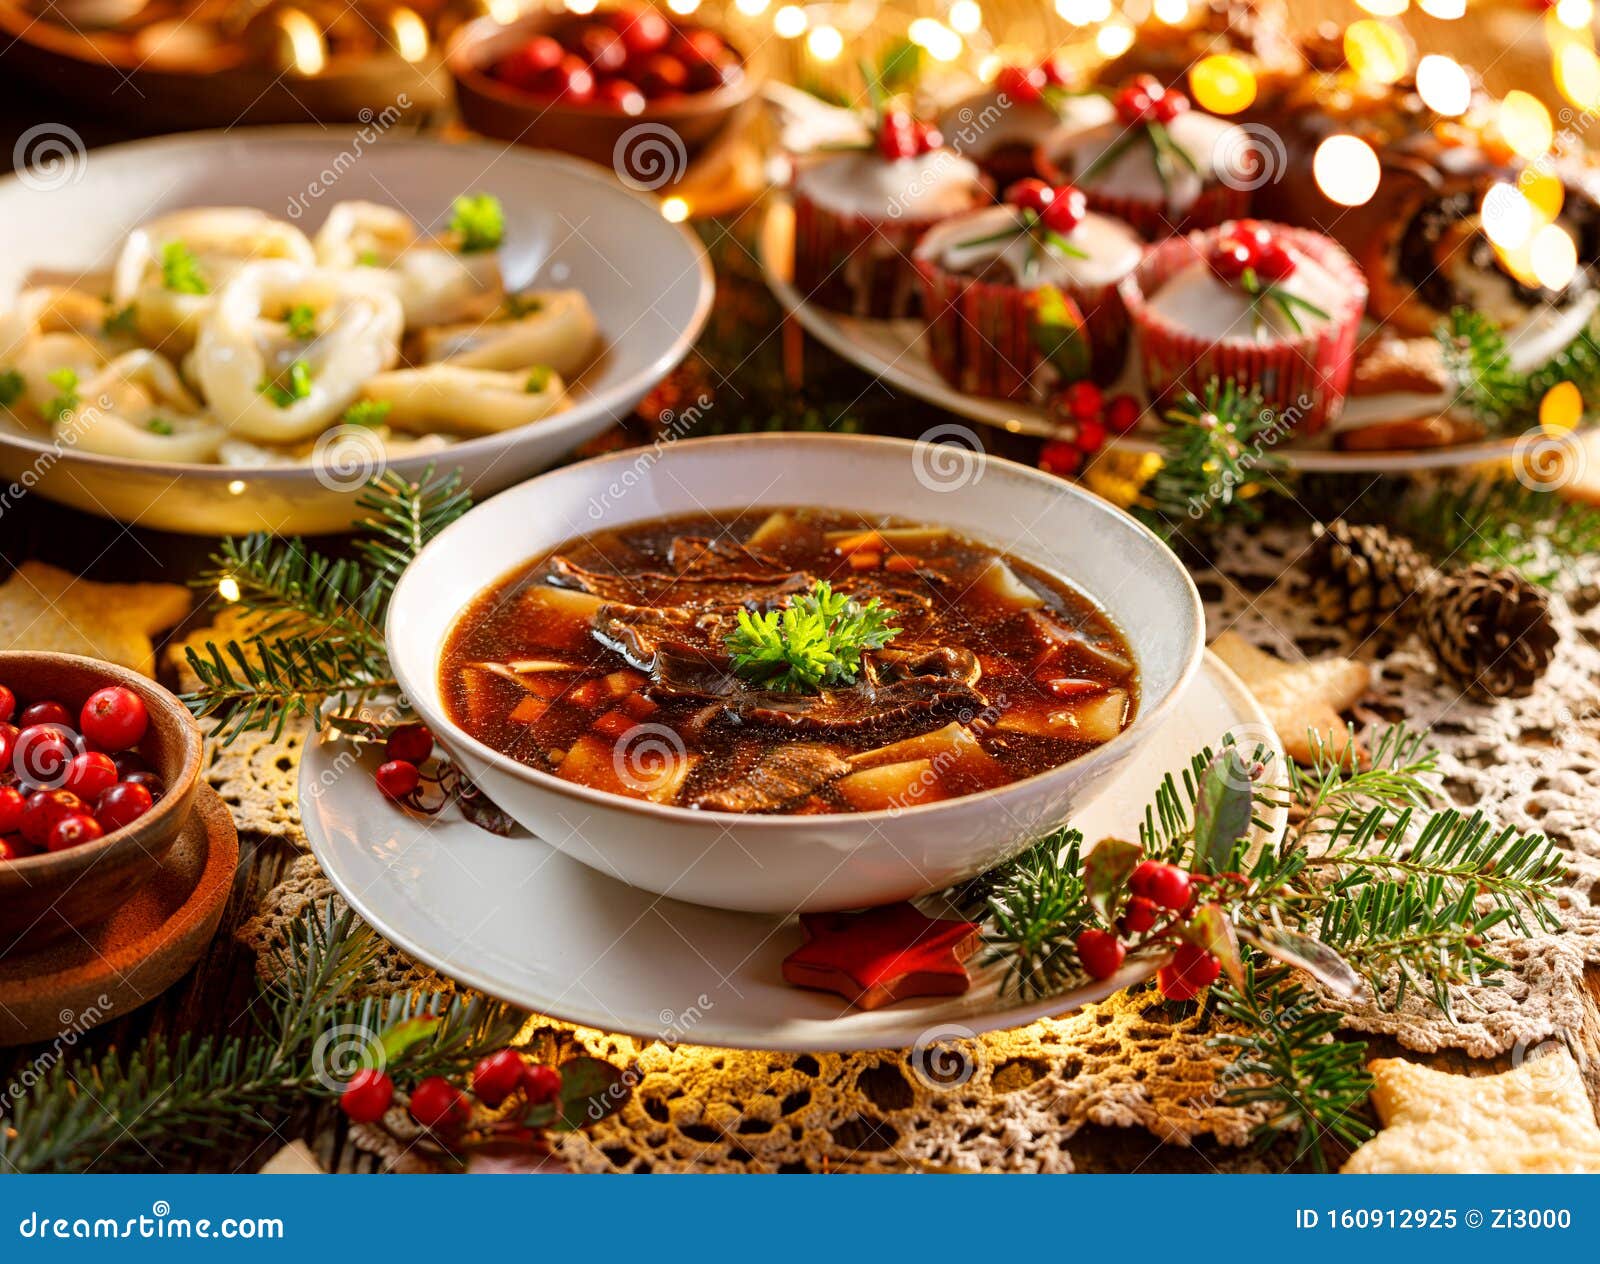 Christmas Mushroom Soup A Traditional Vegetarian Mushroom Soup Made With Dried Forest Mushrooms In A Ceramik Plate On A Festive Stock Image Image Of Fungus Ceramik 160912925